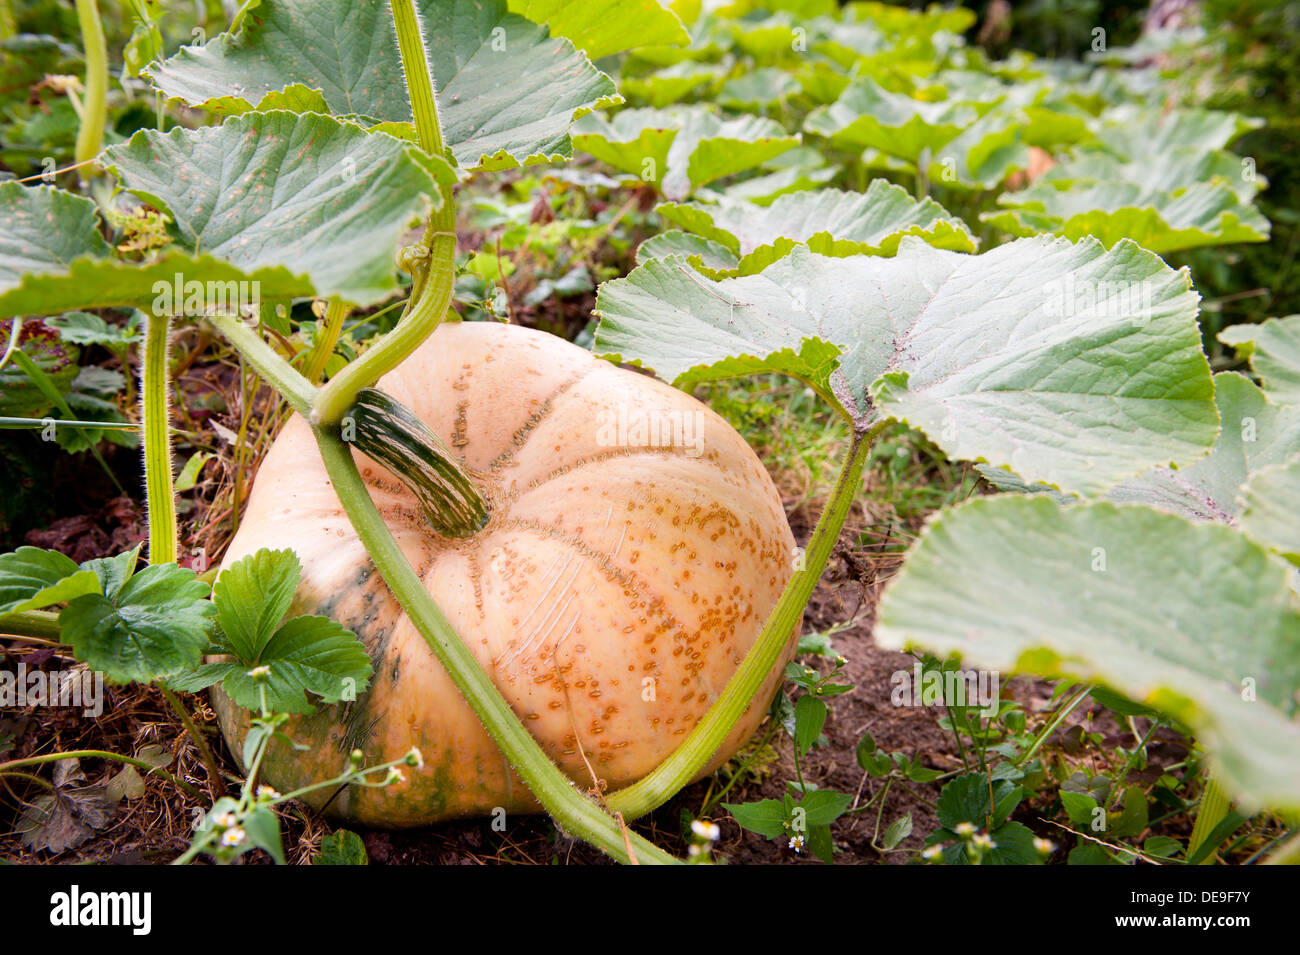 One large pumpkin vegetable grow in ground Stock Photo